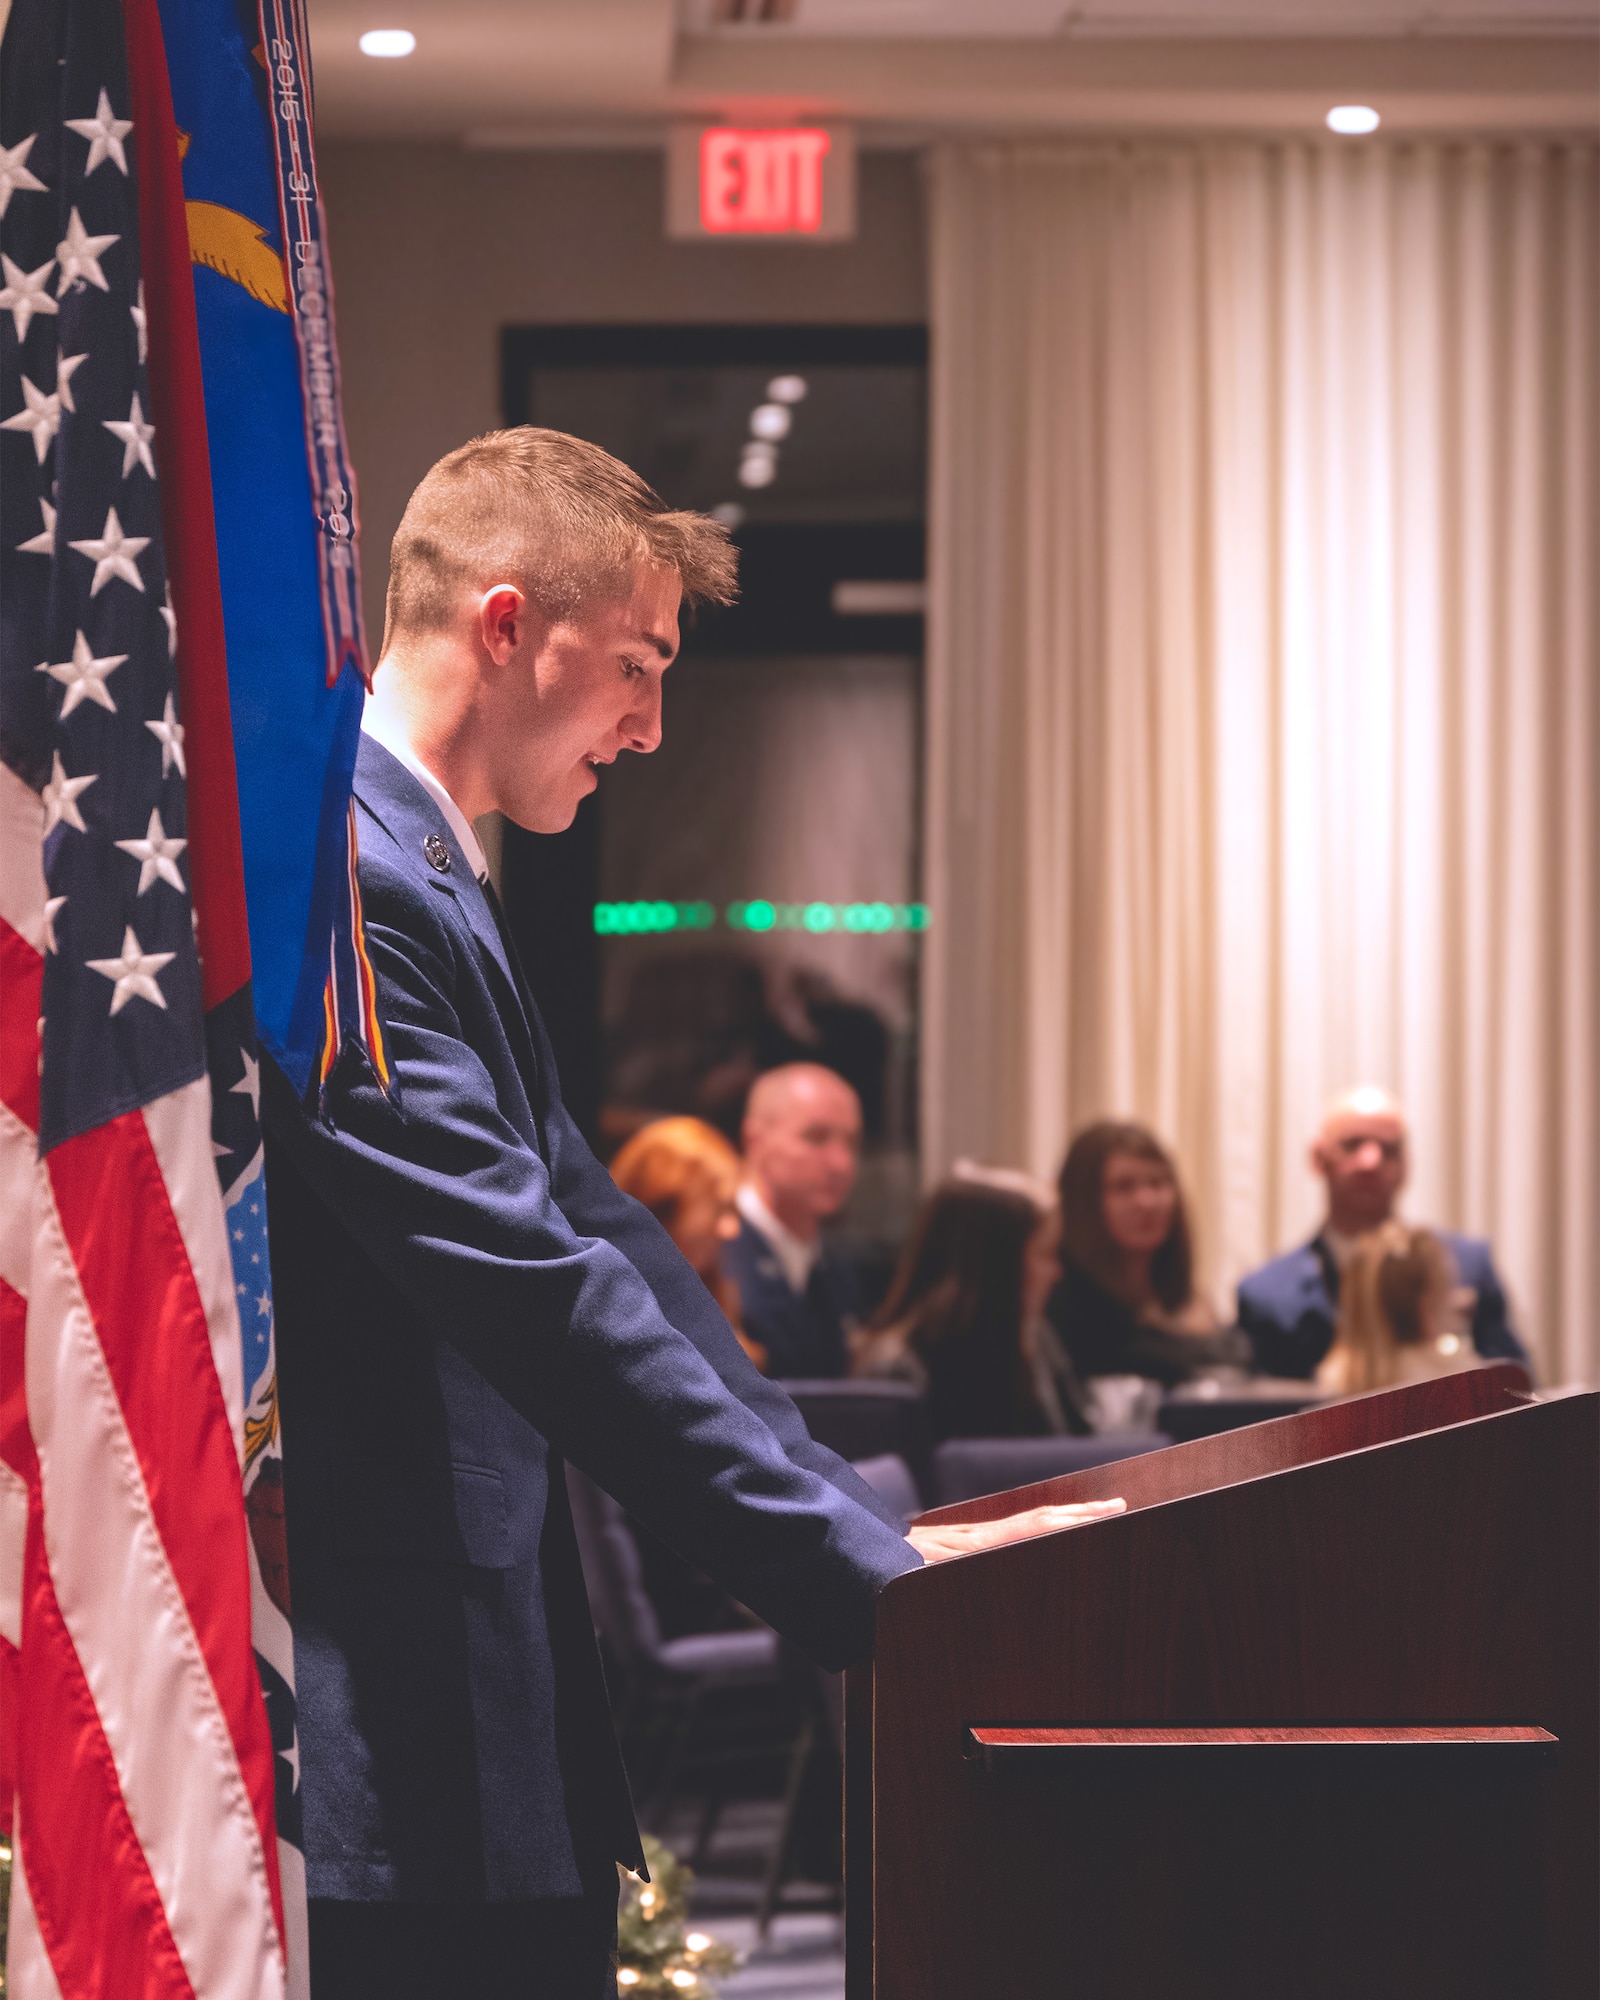 Airman in service dress uniform standing at a lectern reads from a script during a formal awards ceremony